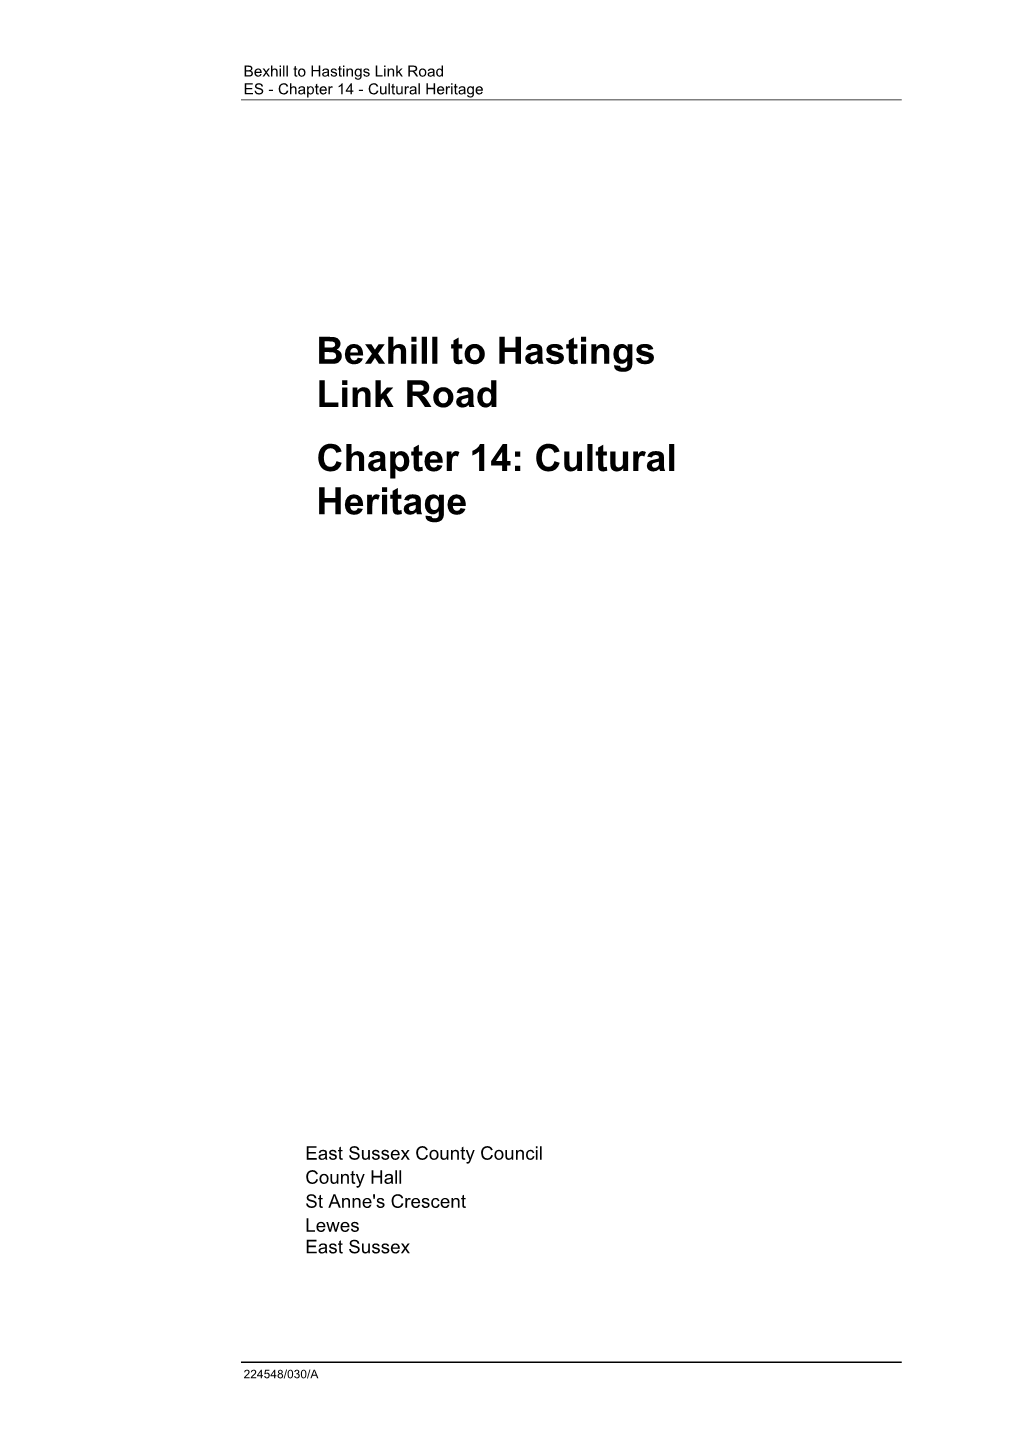 Bexhill to Hastings Link Road Chapter 14: Cultural Heritage